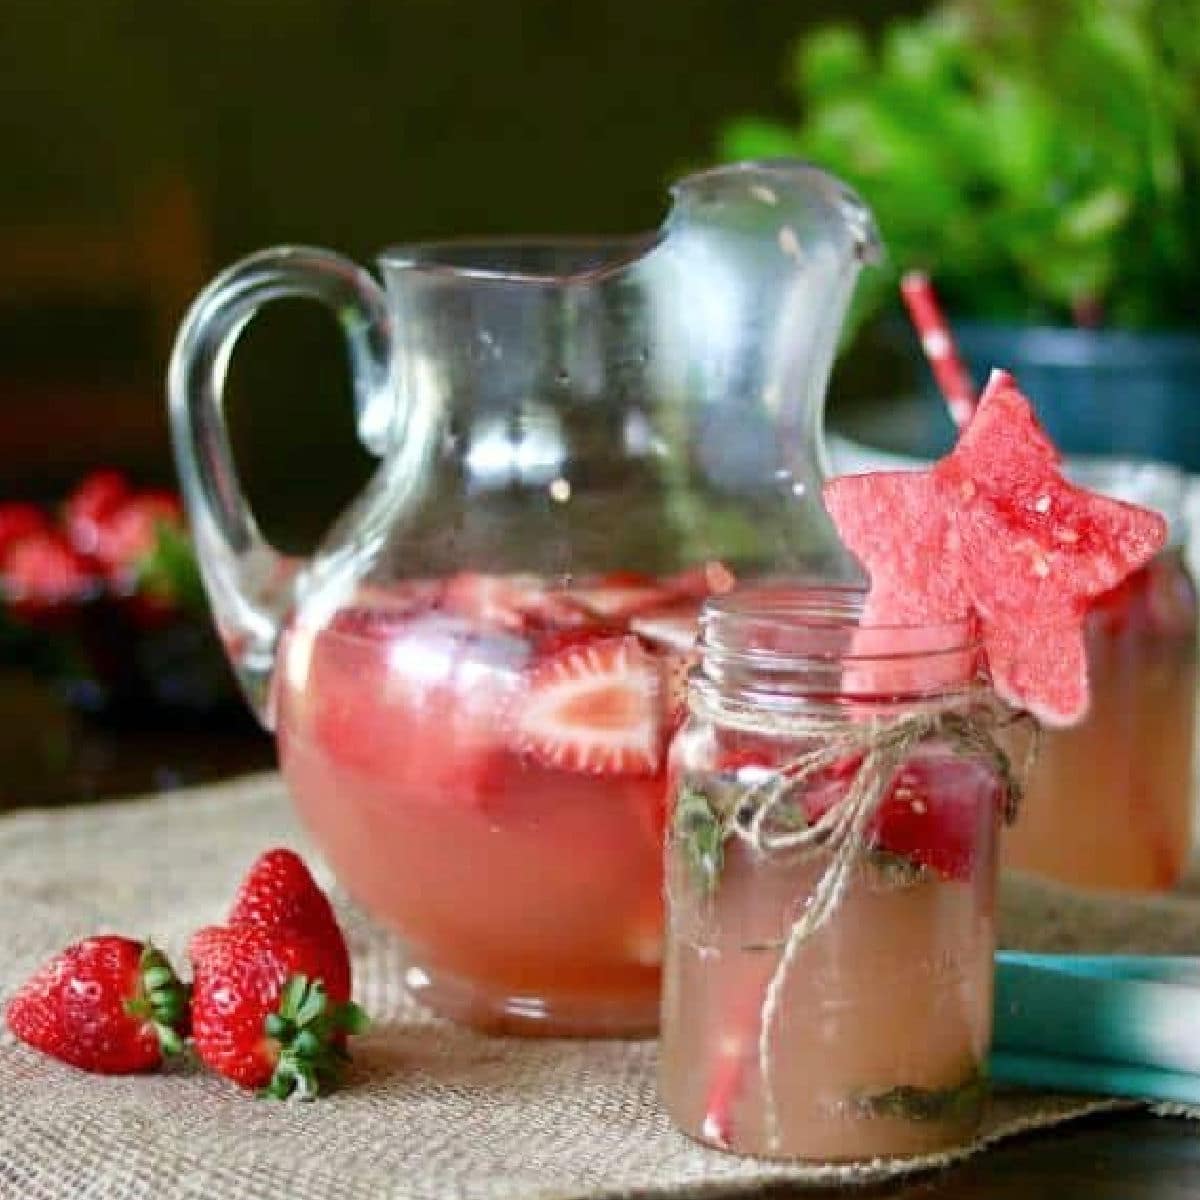 A pitcher of strawberry watermelon margaritas.